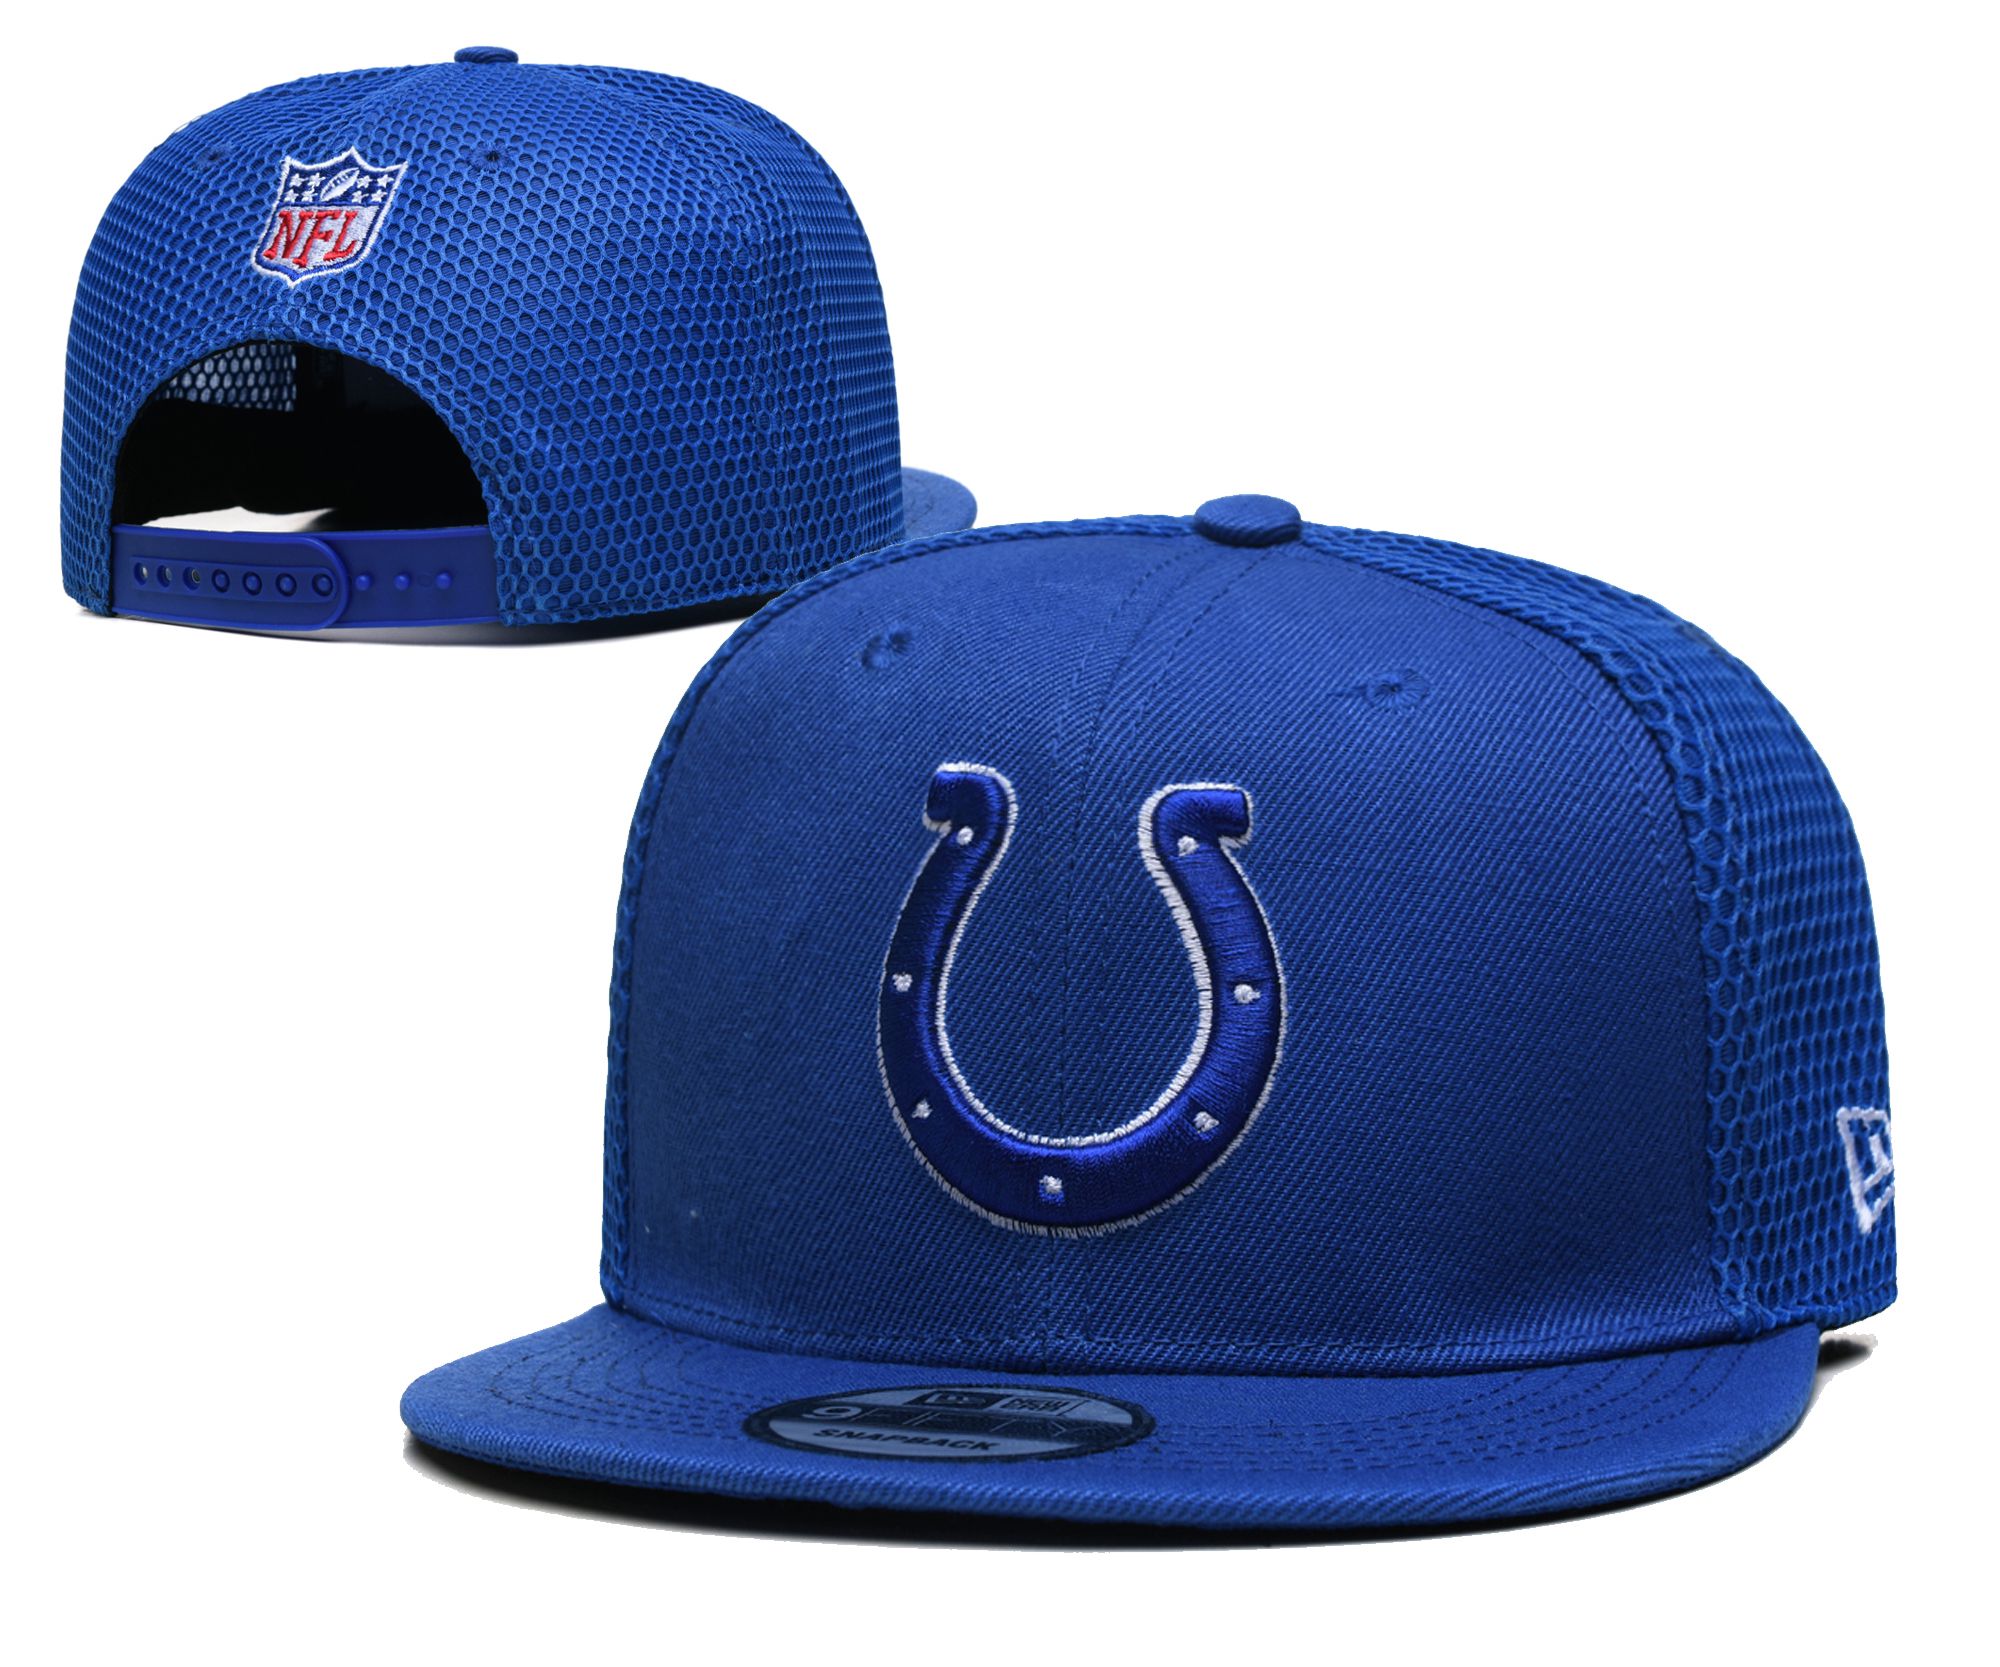 2022 NFL Indianapolis Colts Hat TX 221